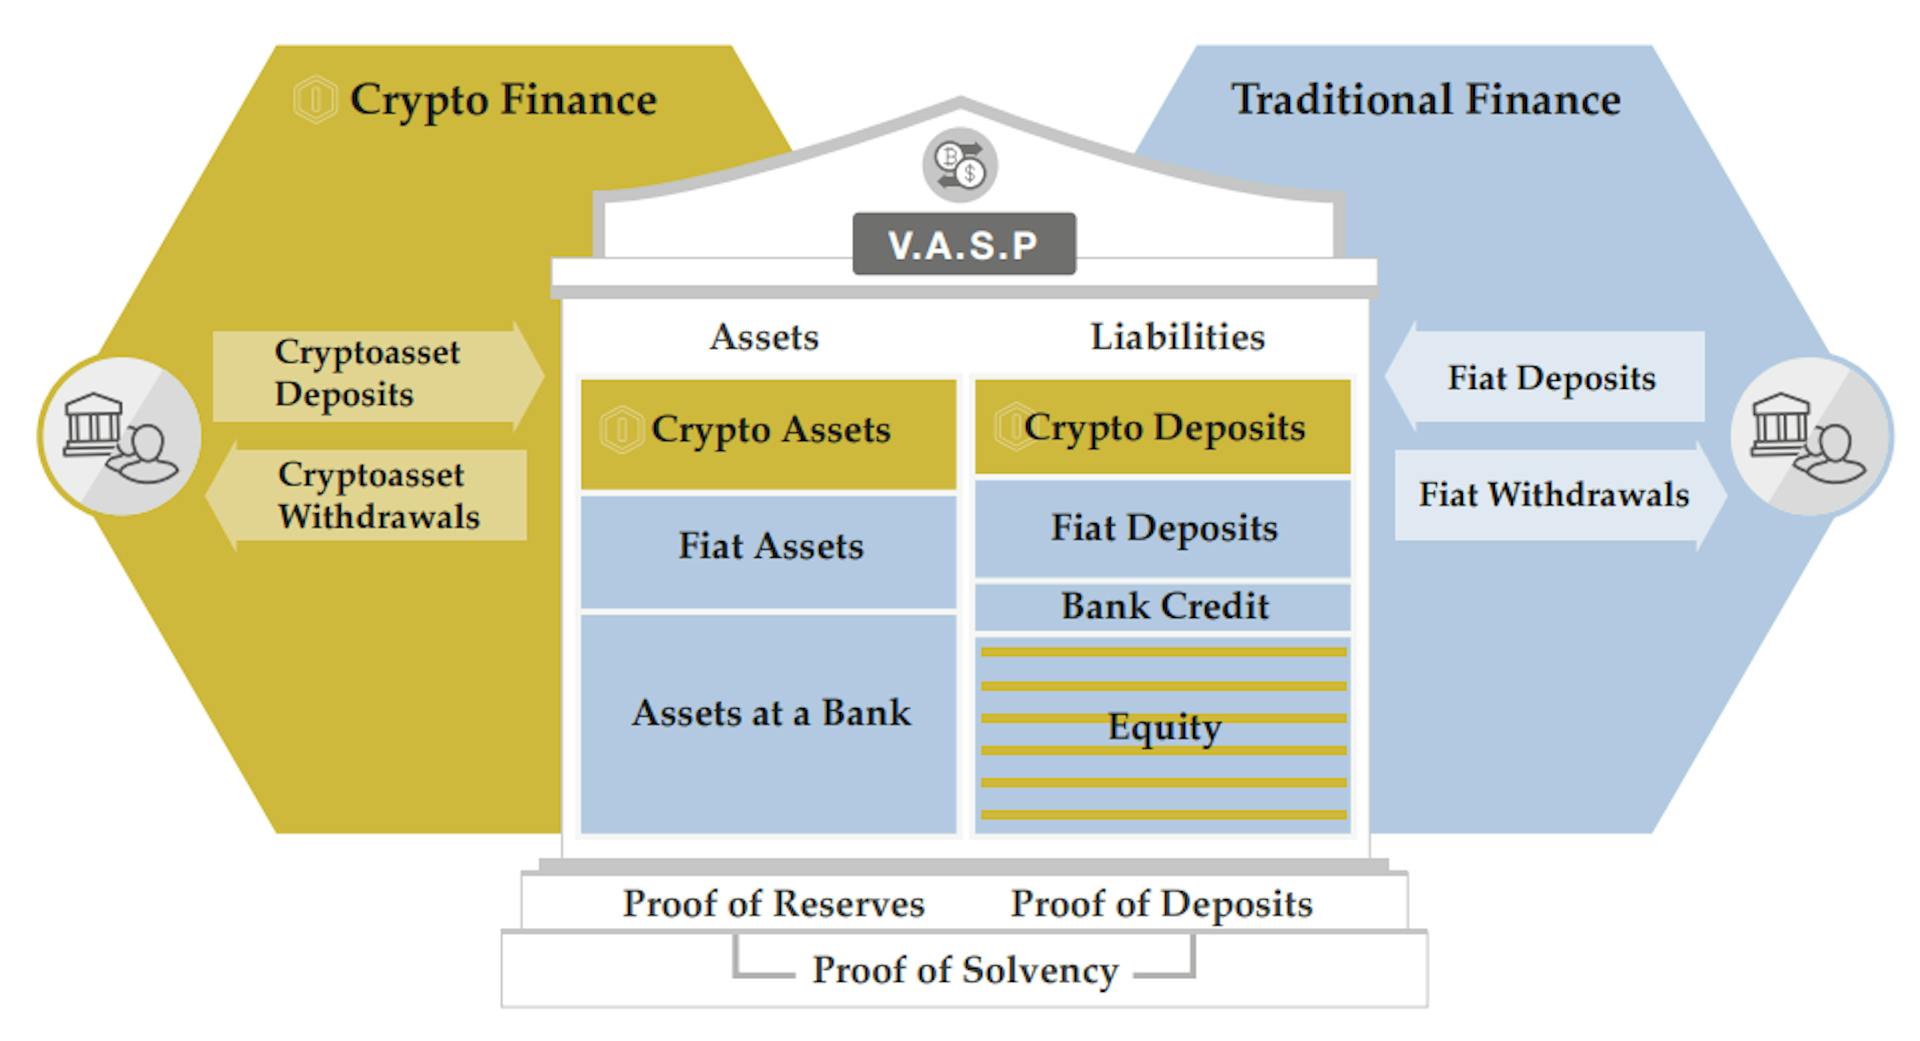 Figure 1: Virtual Asset Service Provider. VASPs hold virtual assets in custody, transfer them, and facilitate their purchase and sale against fiat currencies and other virtual assets. Customers can interact with them by depositing or withdrawing cryptoassets through DLT-based transactions, or fiat currency via commercial banks.